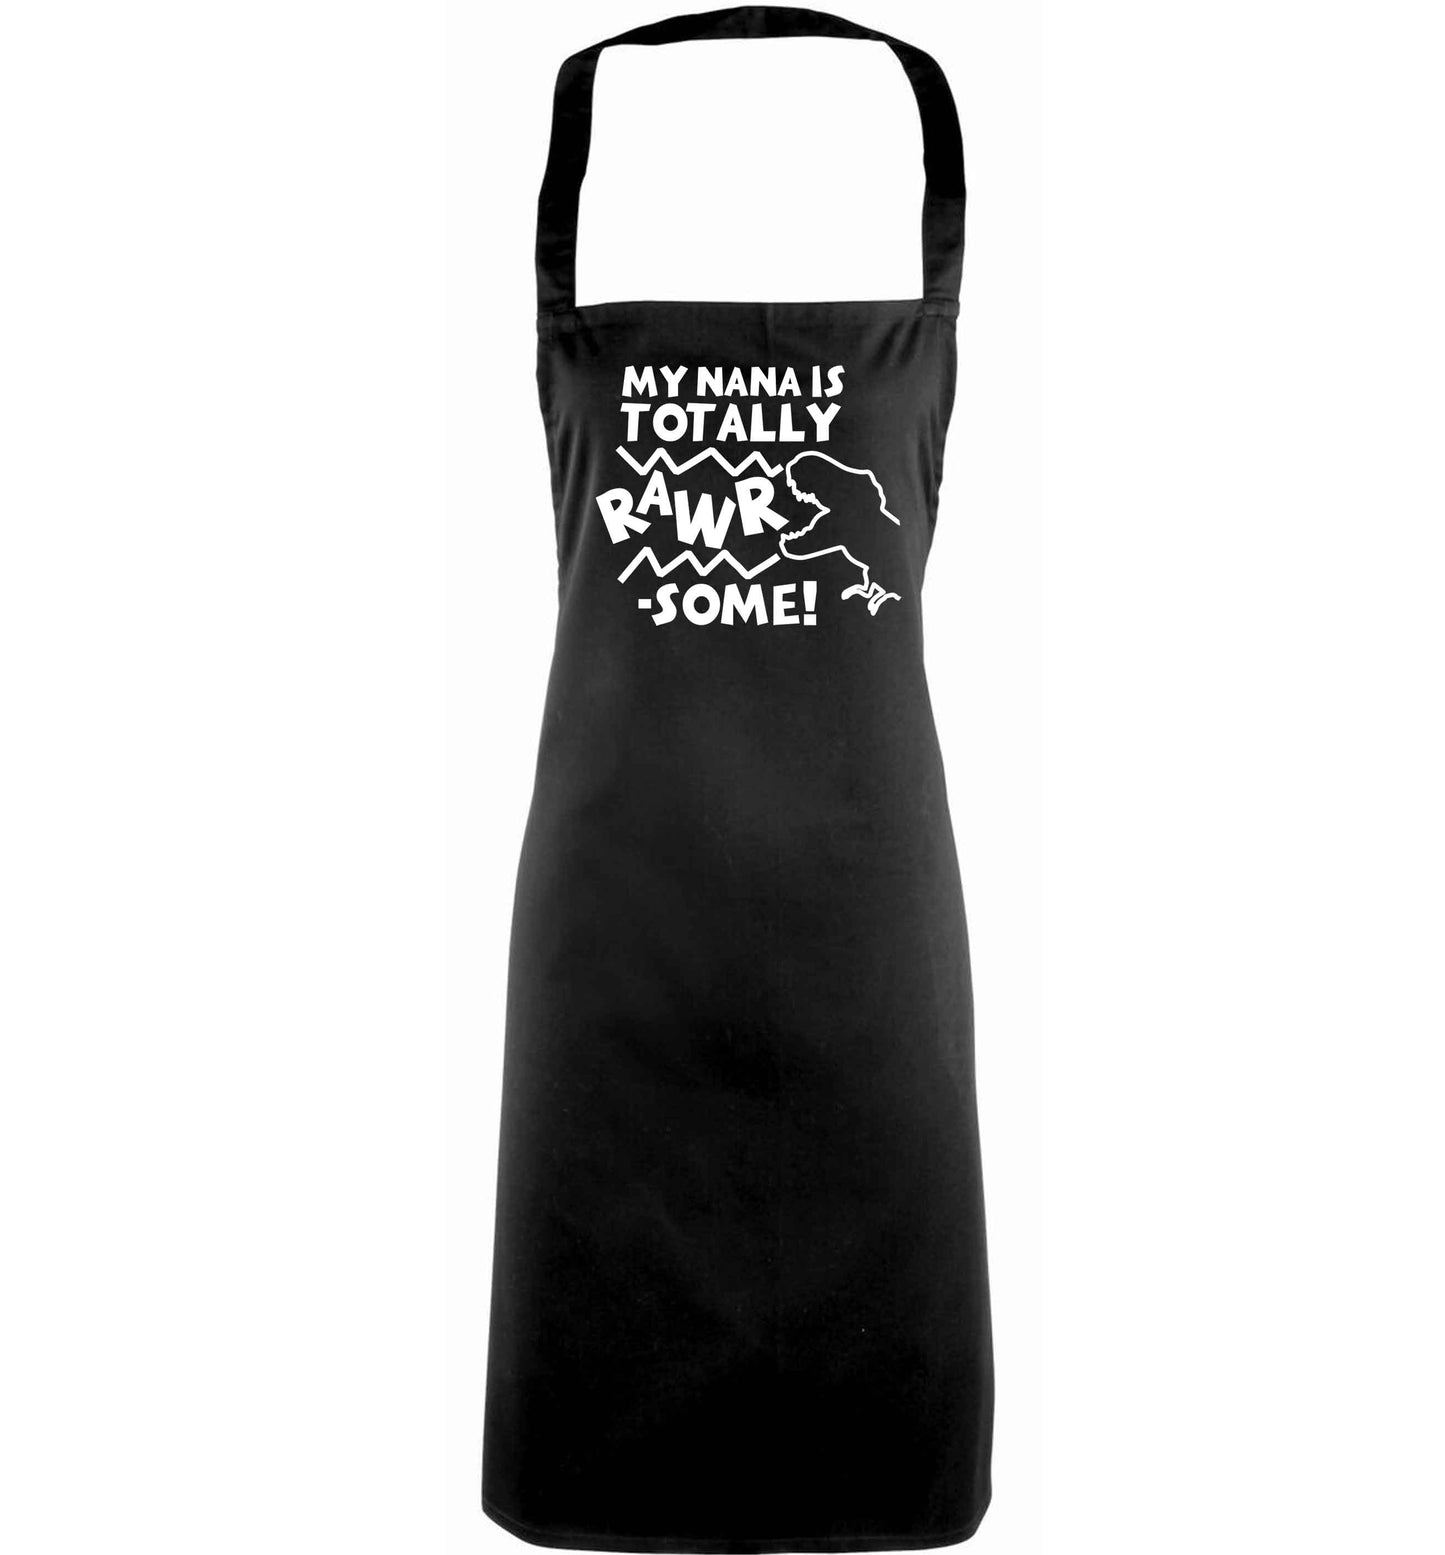 My nana is totally rawrsome adults black apron